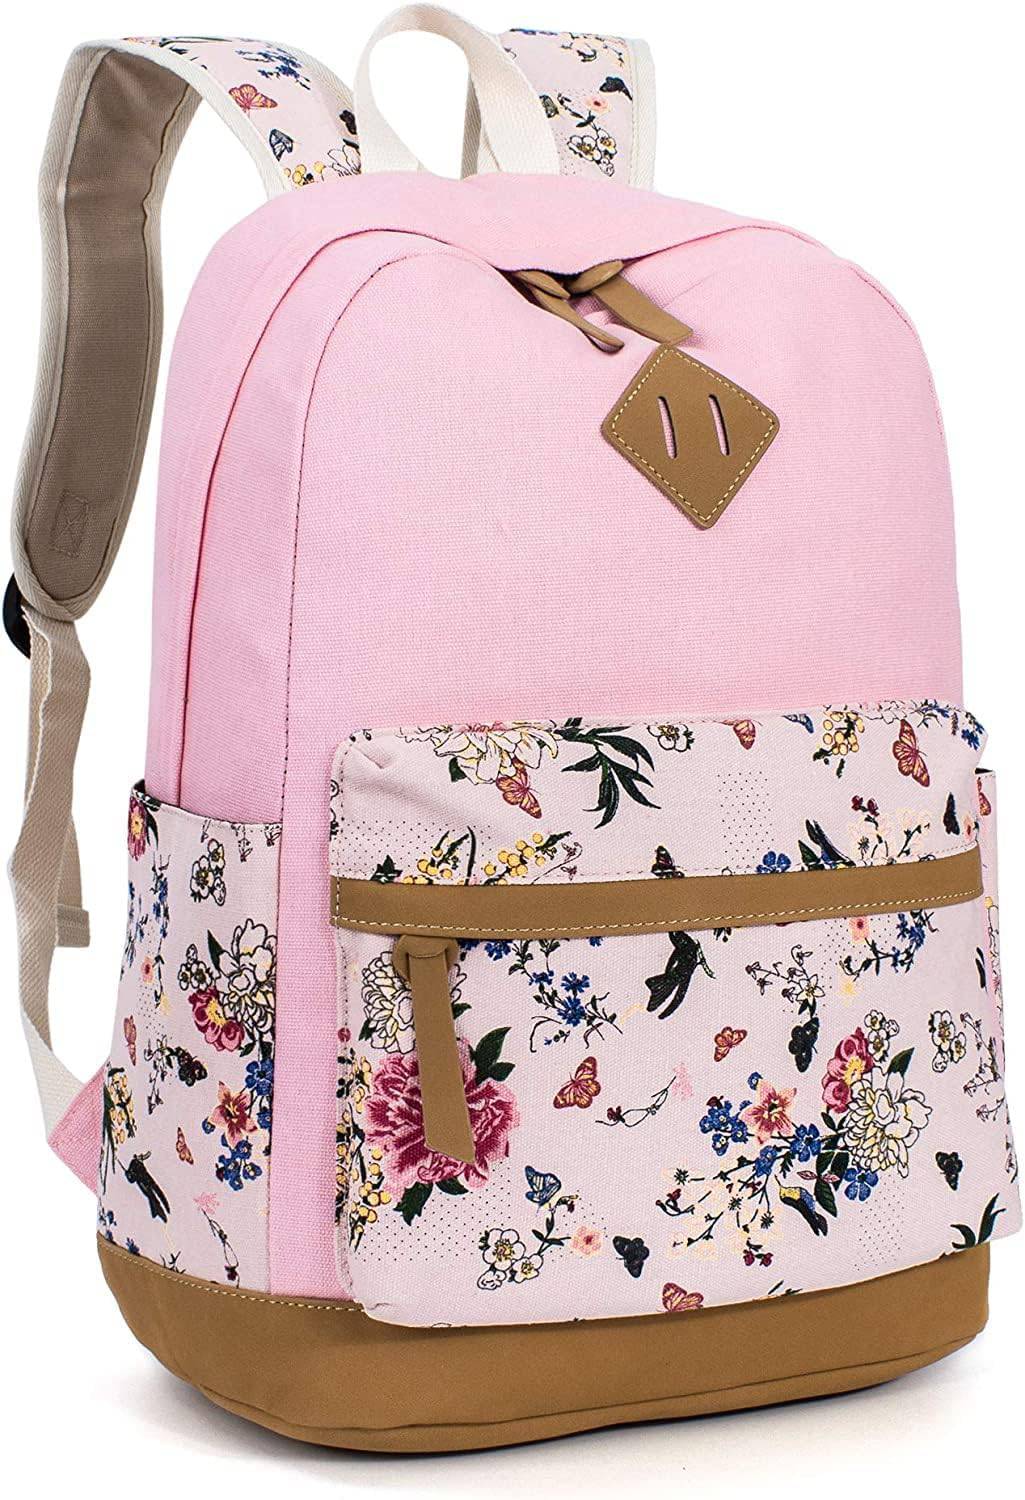 COOLBABY BL4366 Chic Flower Printed Canvas College Bag - COOL BABY